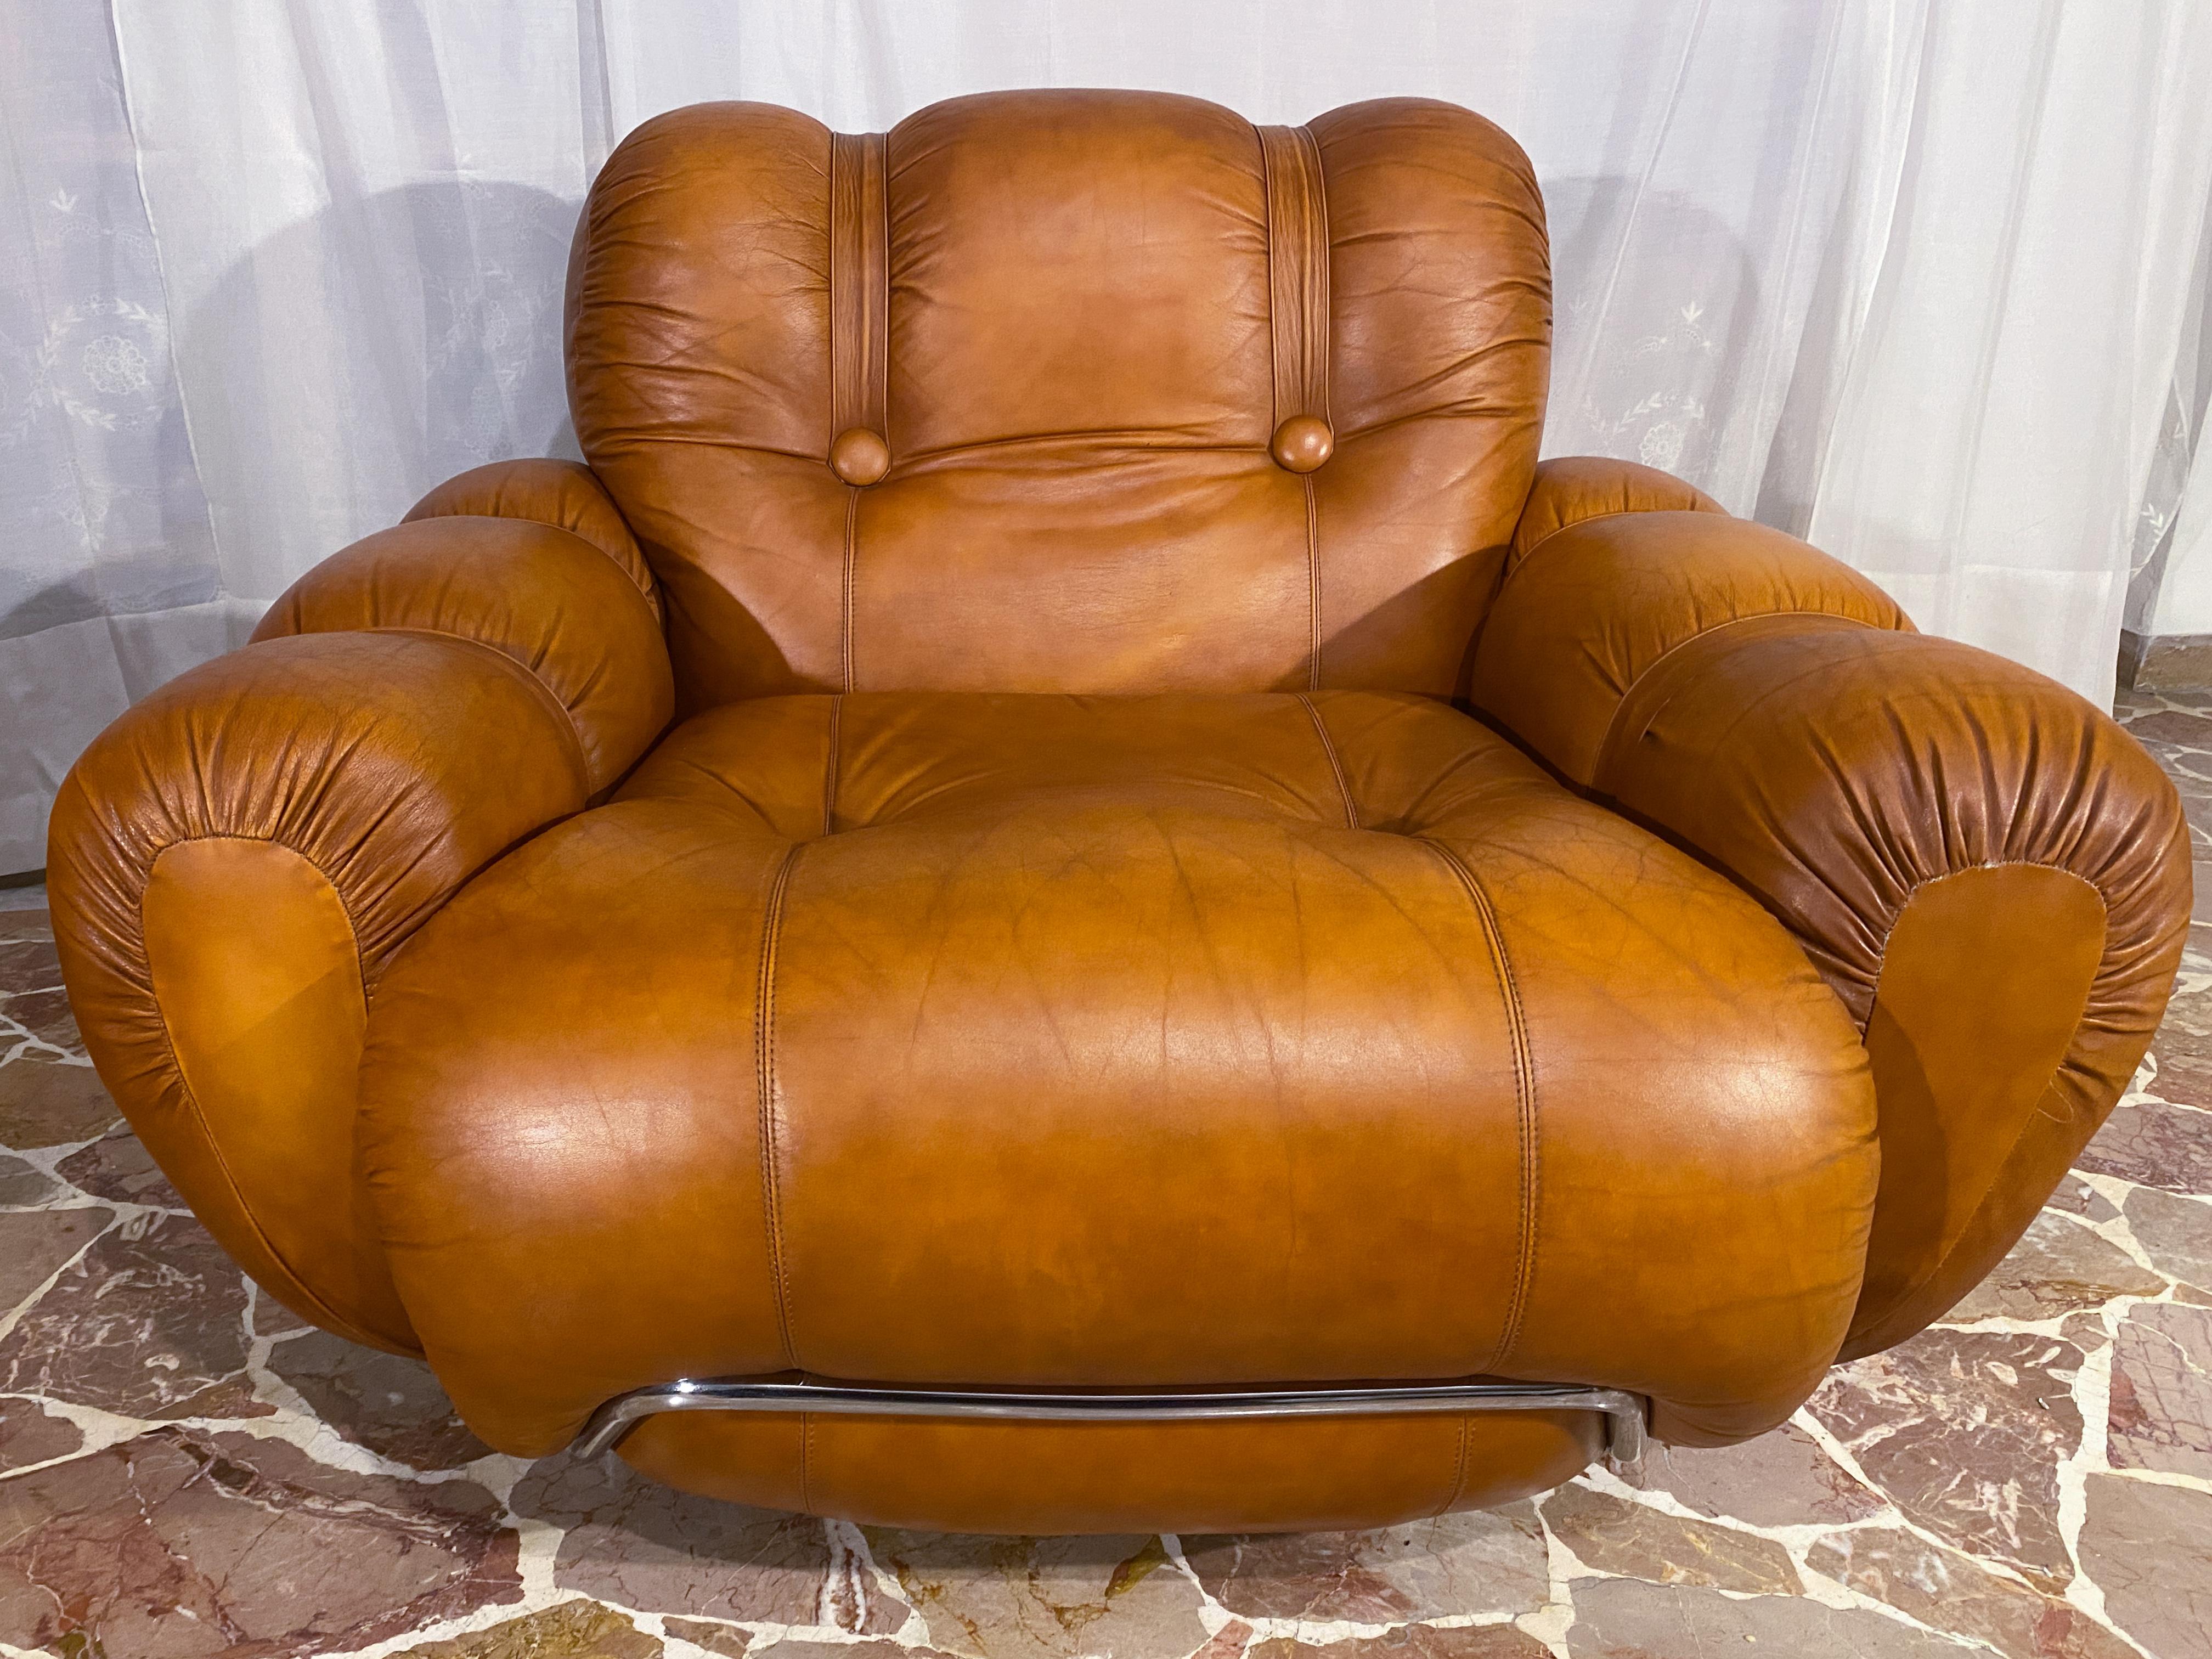 Italian Mid-Century Space Age Living Room Set in Natural Leather, 1970 For Sale 5